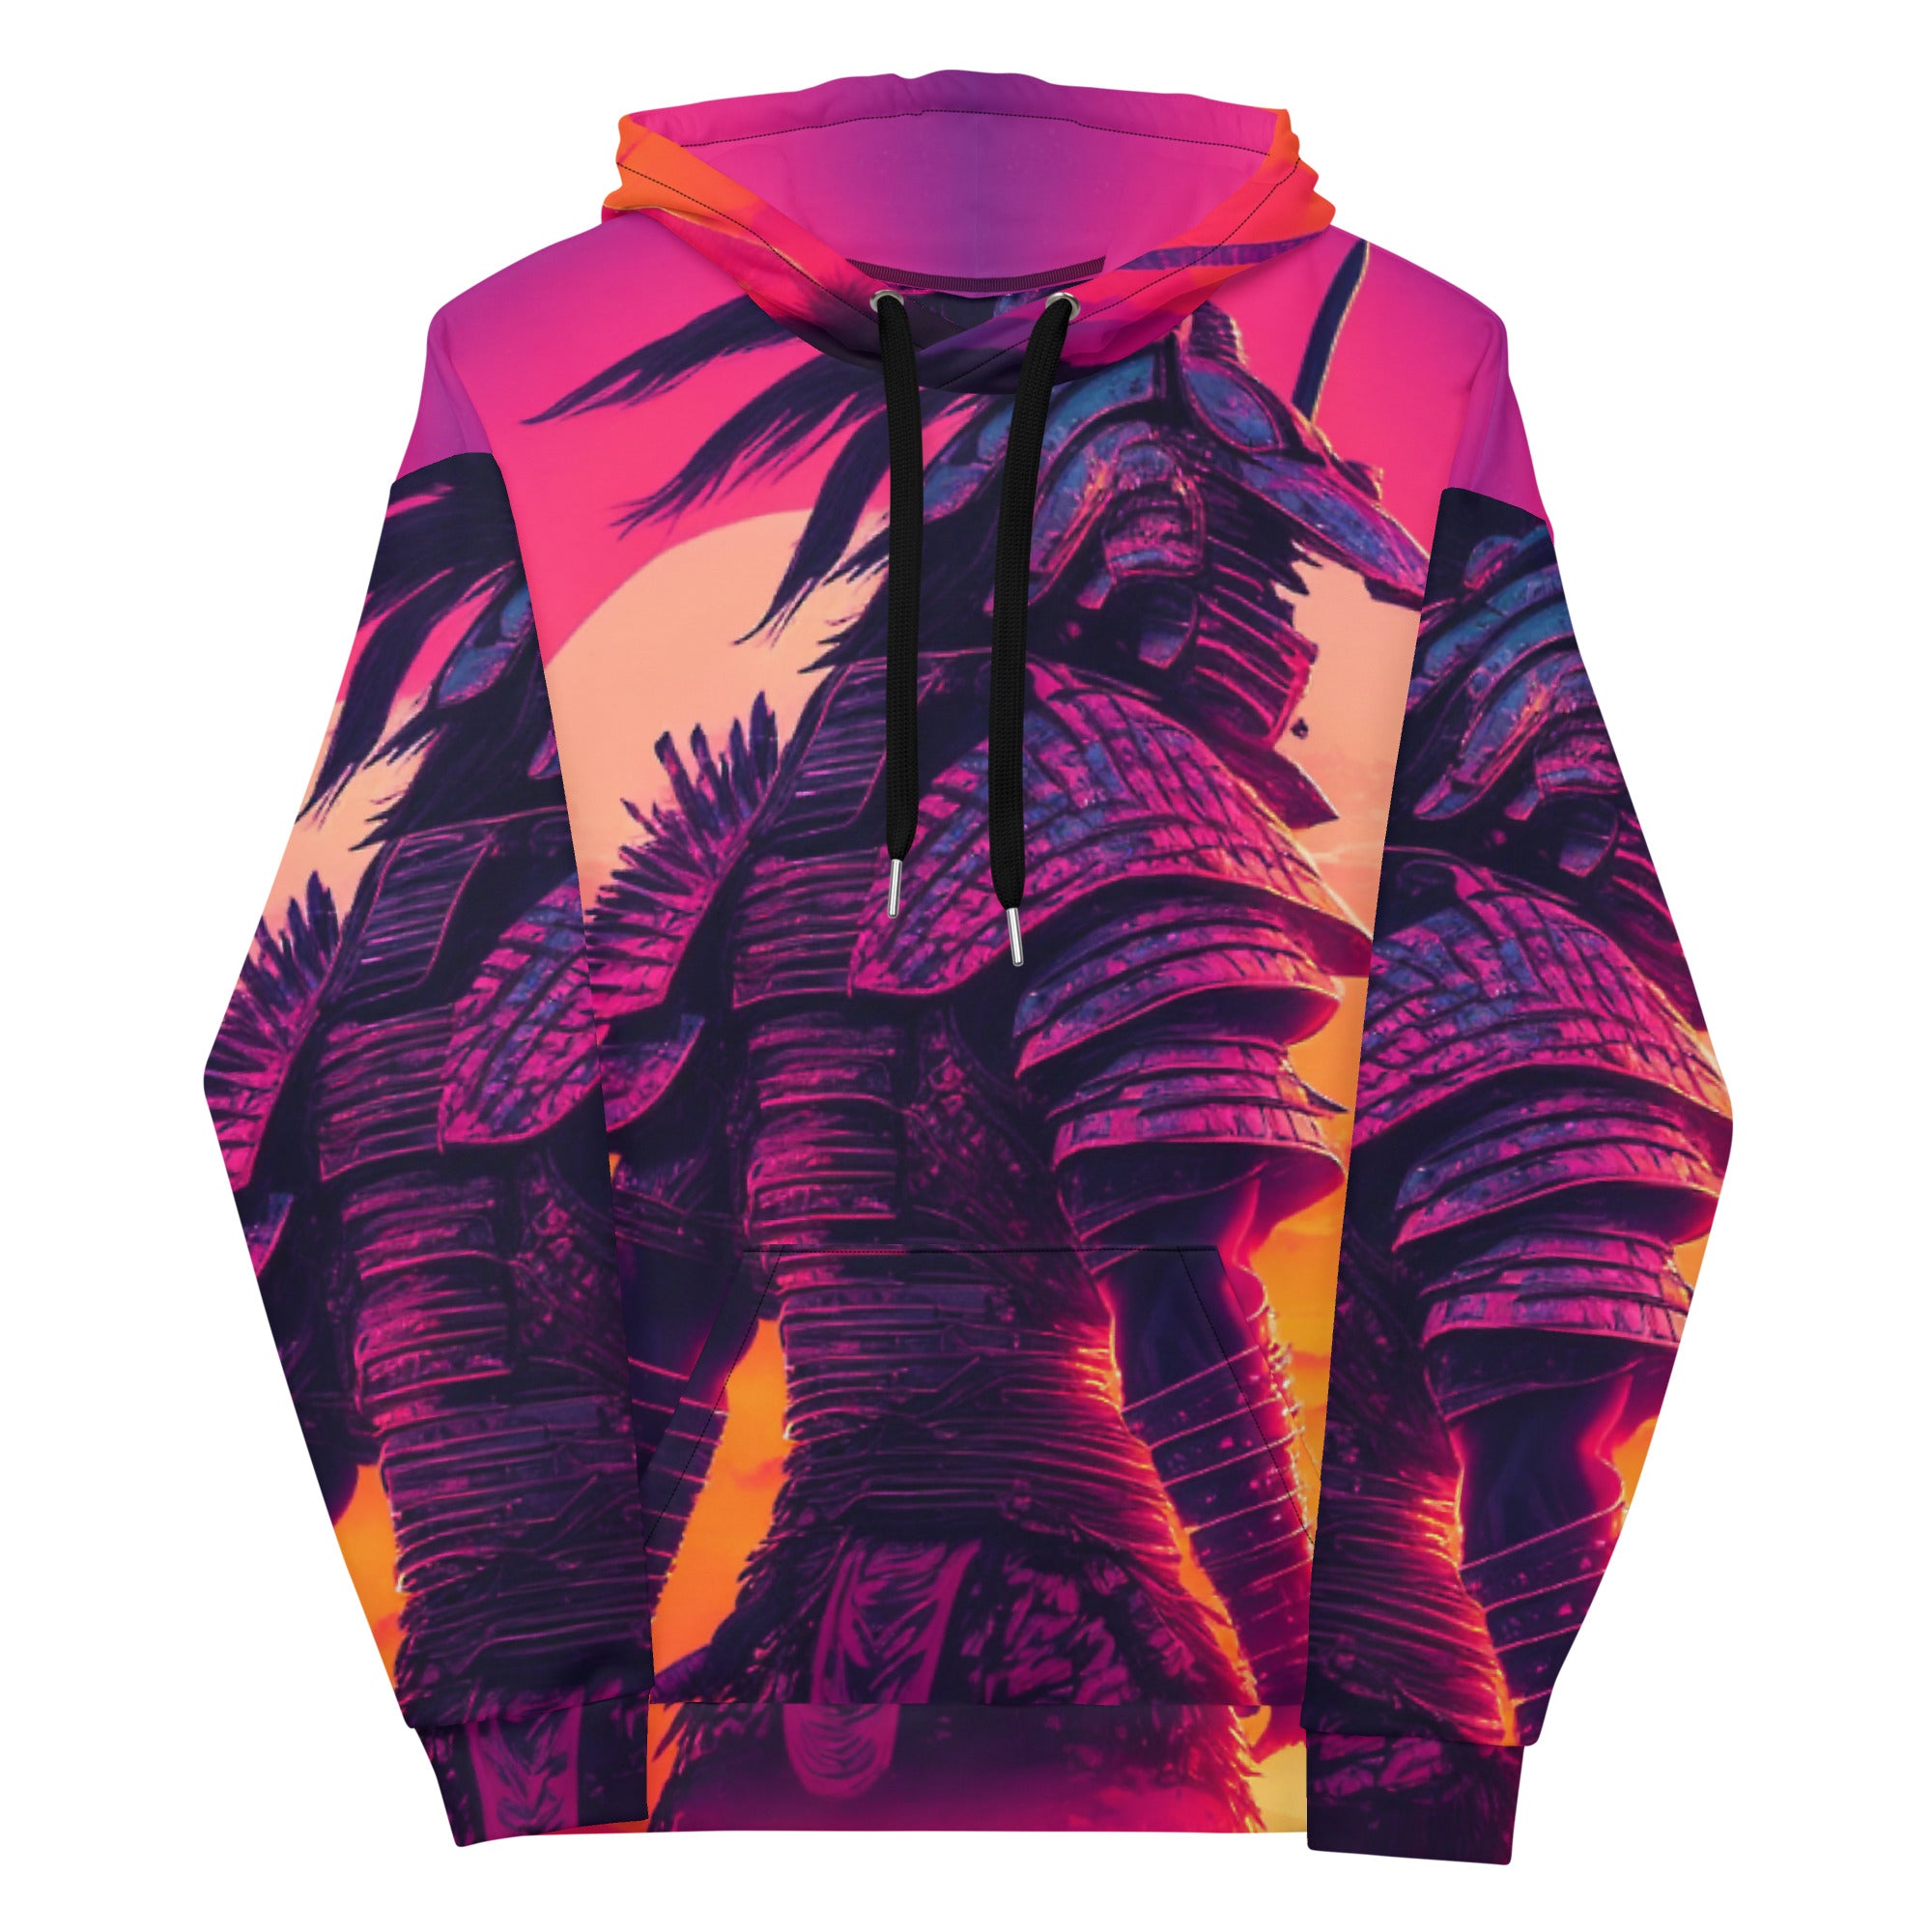 Elevate your style with the PLUR WARRIOR HOODIE (UNISEX). Show your love for plur and stand out with the unique rave-inspired design. Perfect for any occasion, this comfortable hoodie is a must-have for any rave enthusiast. Represent PLUR and make a bold statement with this one-of-a-kind piece.